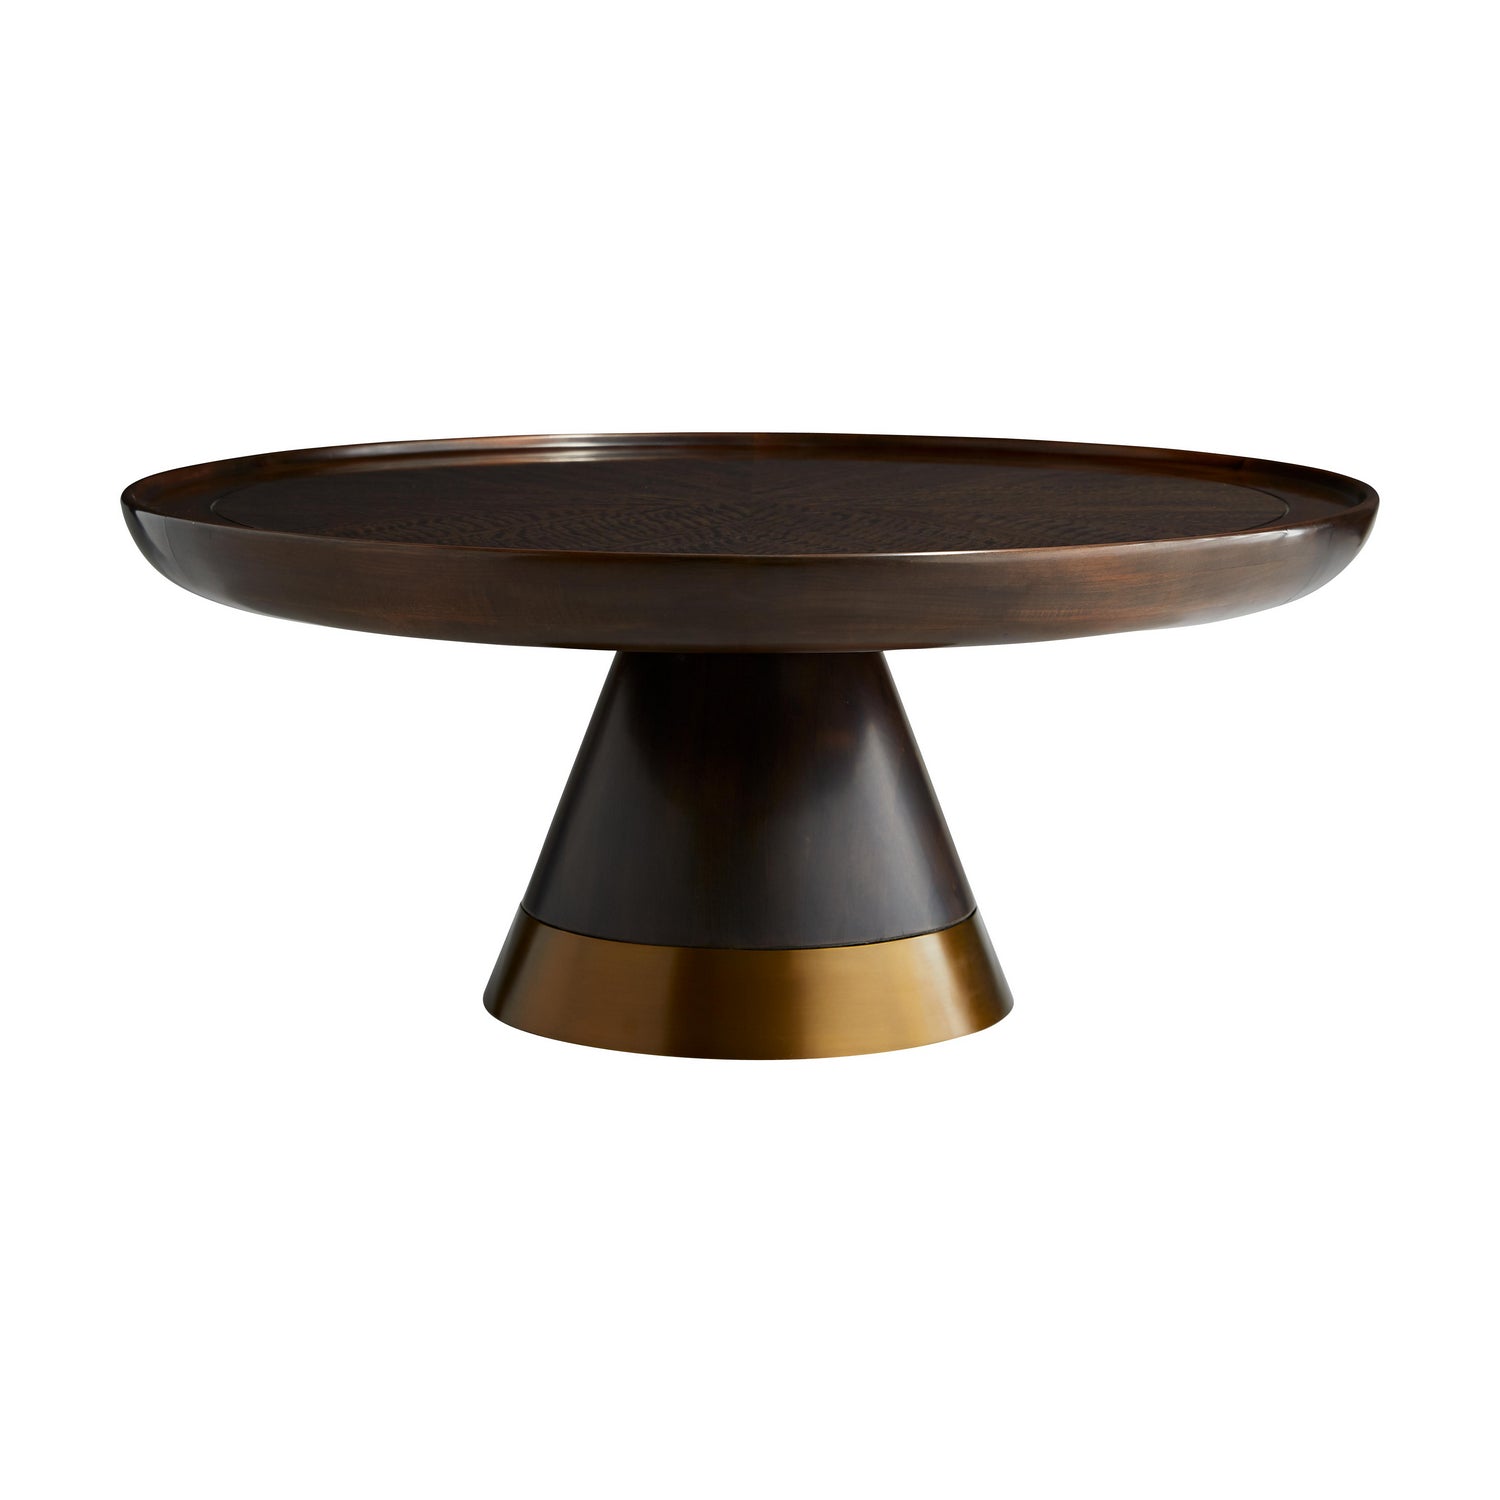 Cocktail Table from the Violi collection in Brindle finish